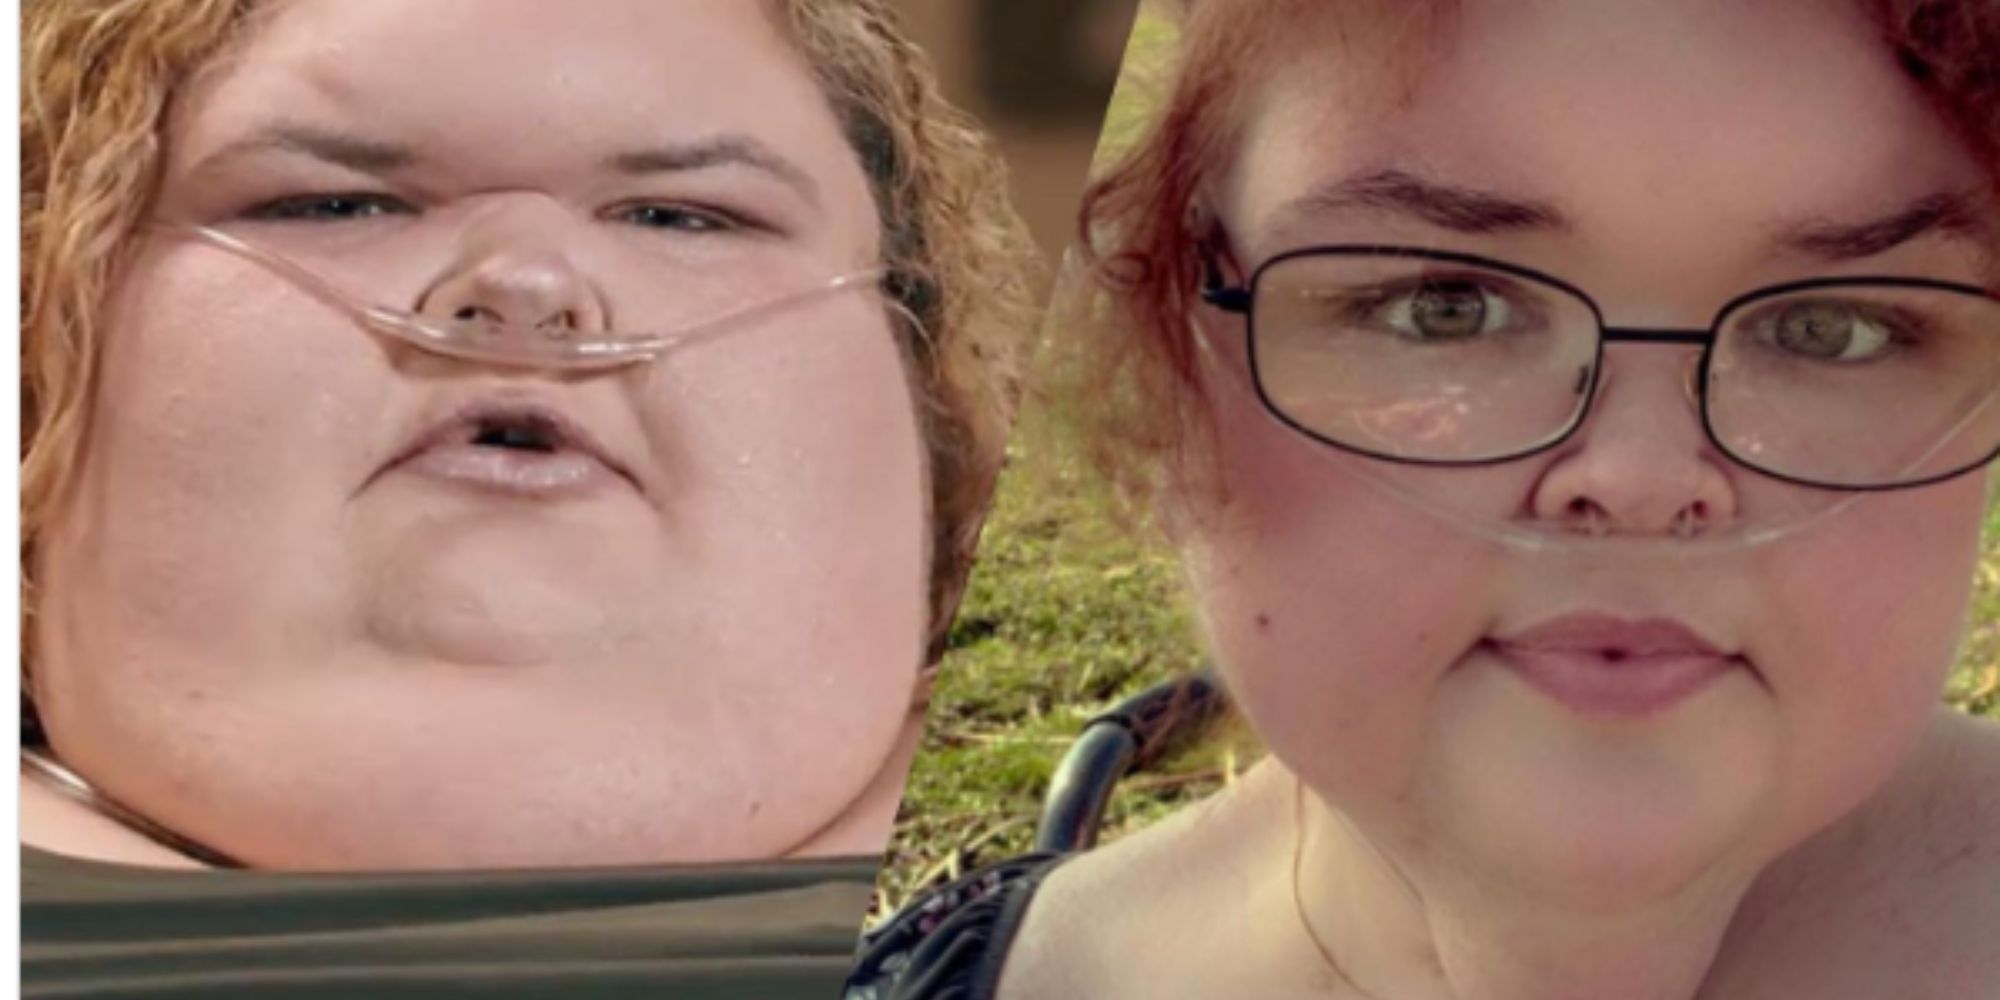 1000 lb sister Tammy Slaton before and after the split